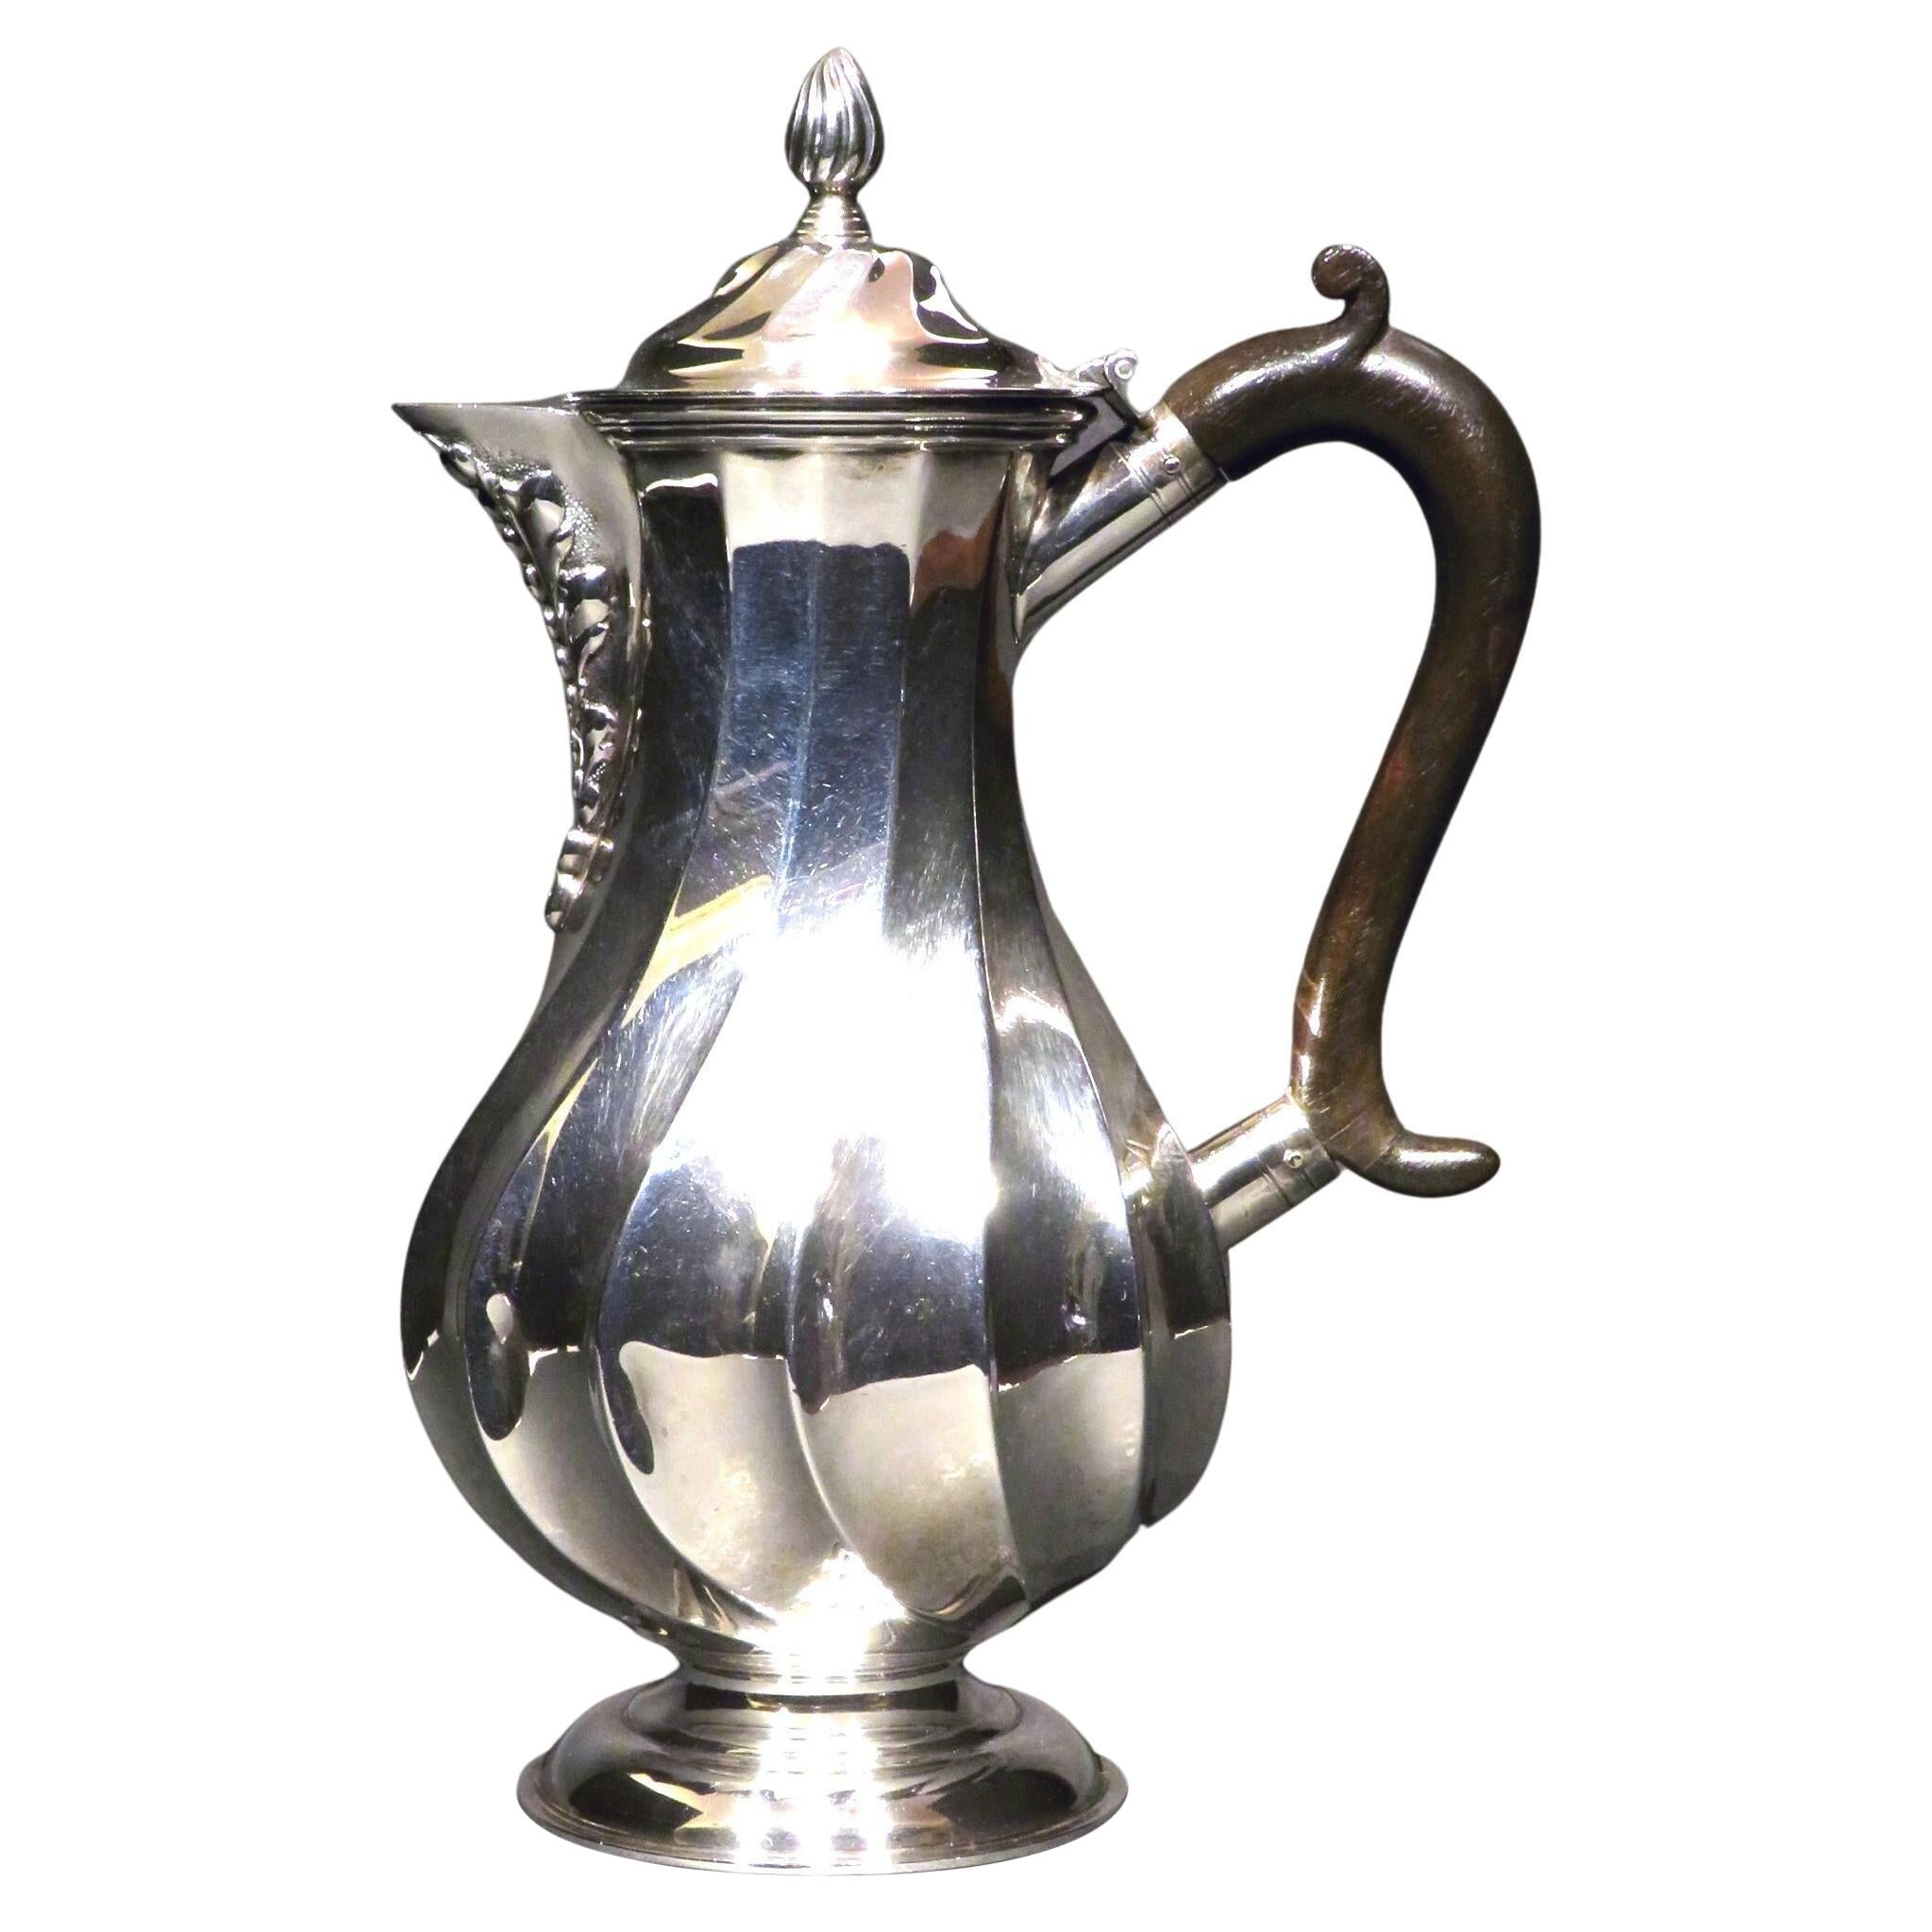 Fine Arts & Crafts Period Sterling Silver Hot Water / Hot Milk Pot, London 1897 For Sale